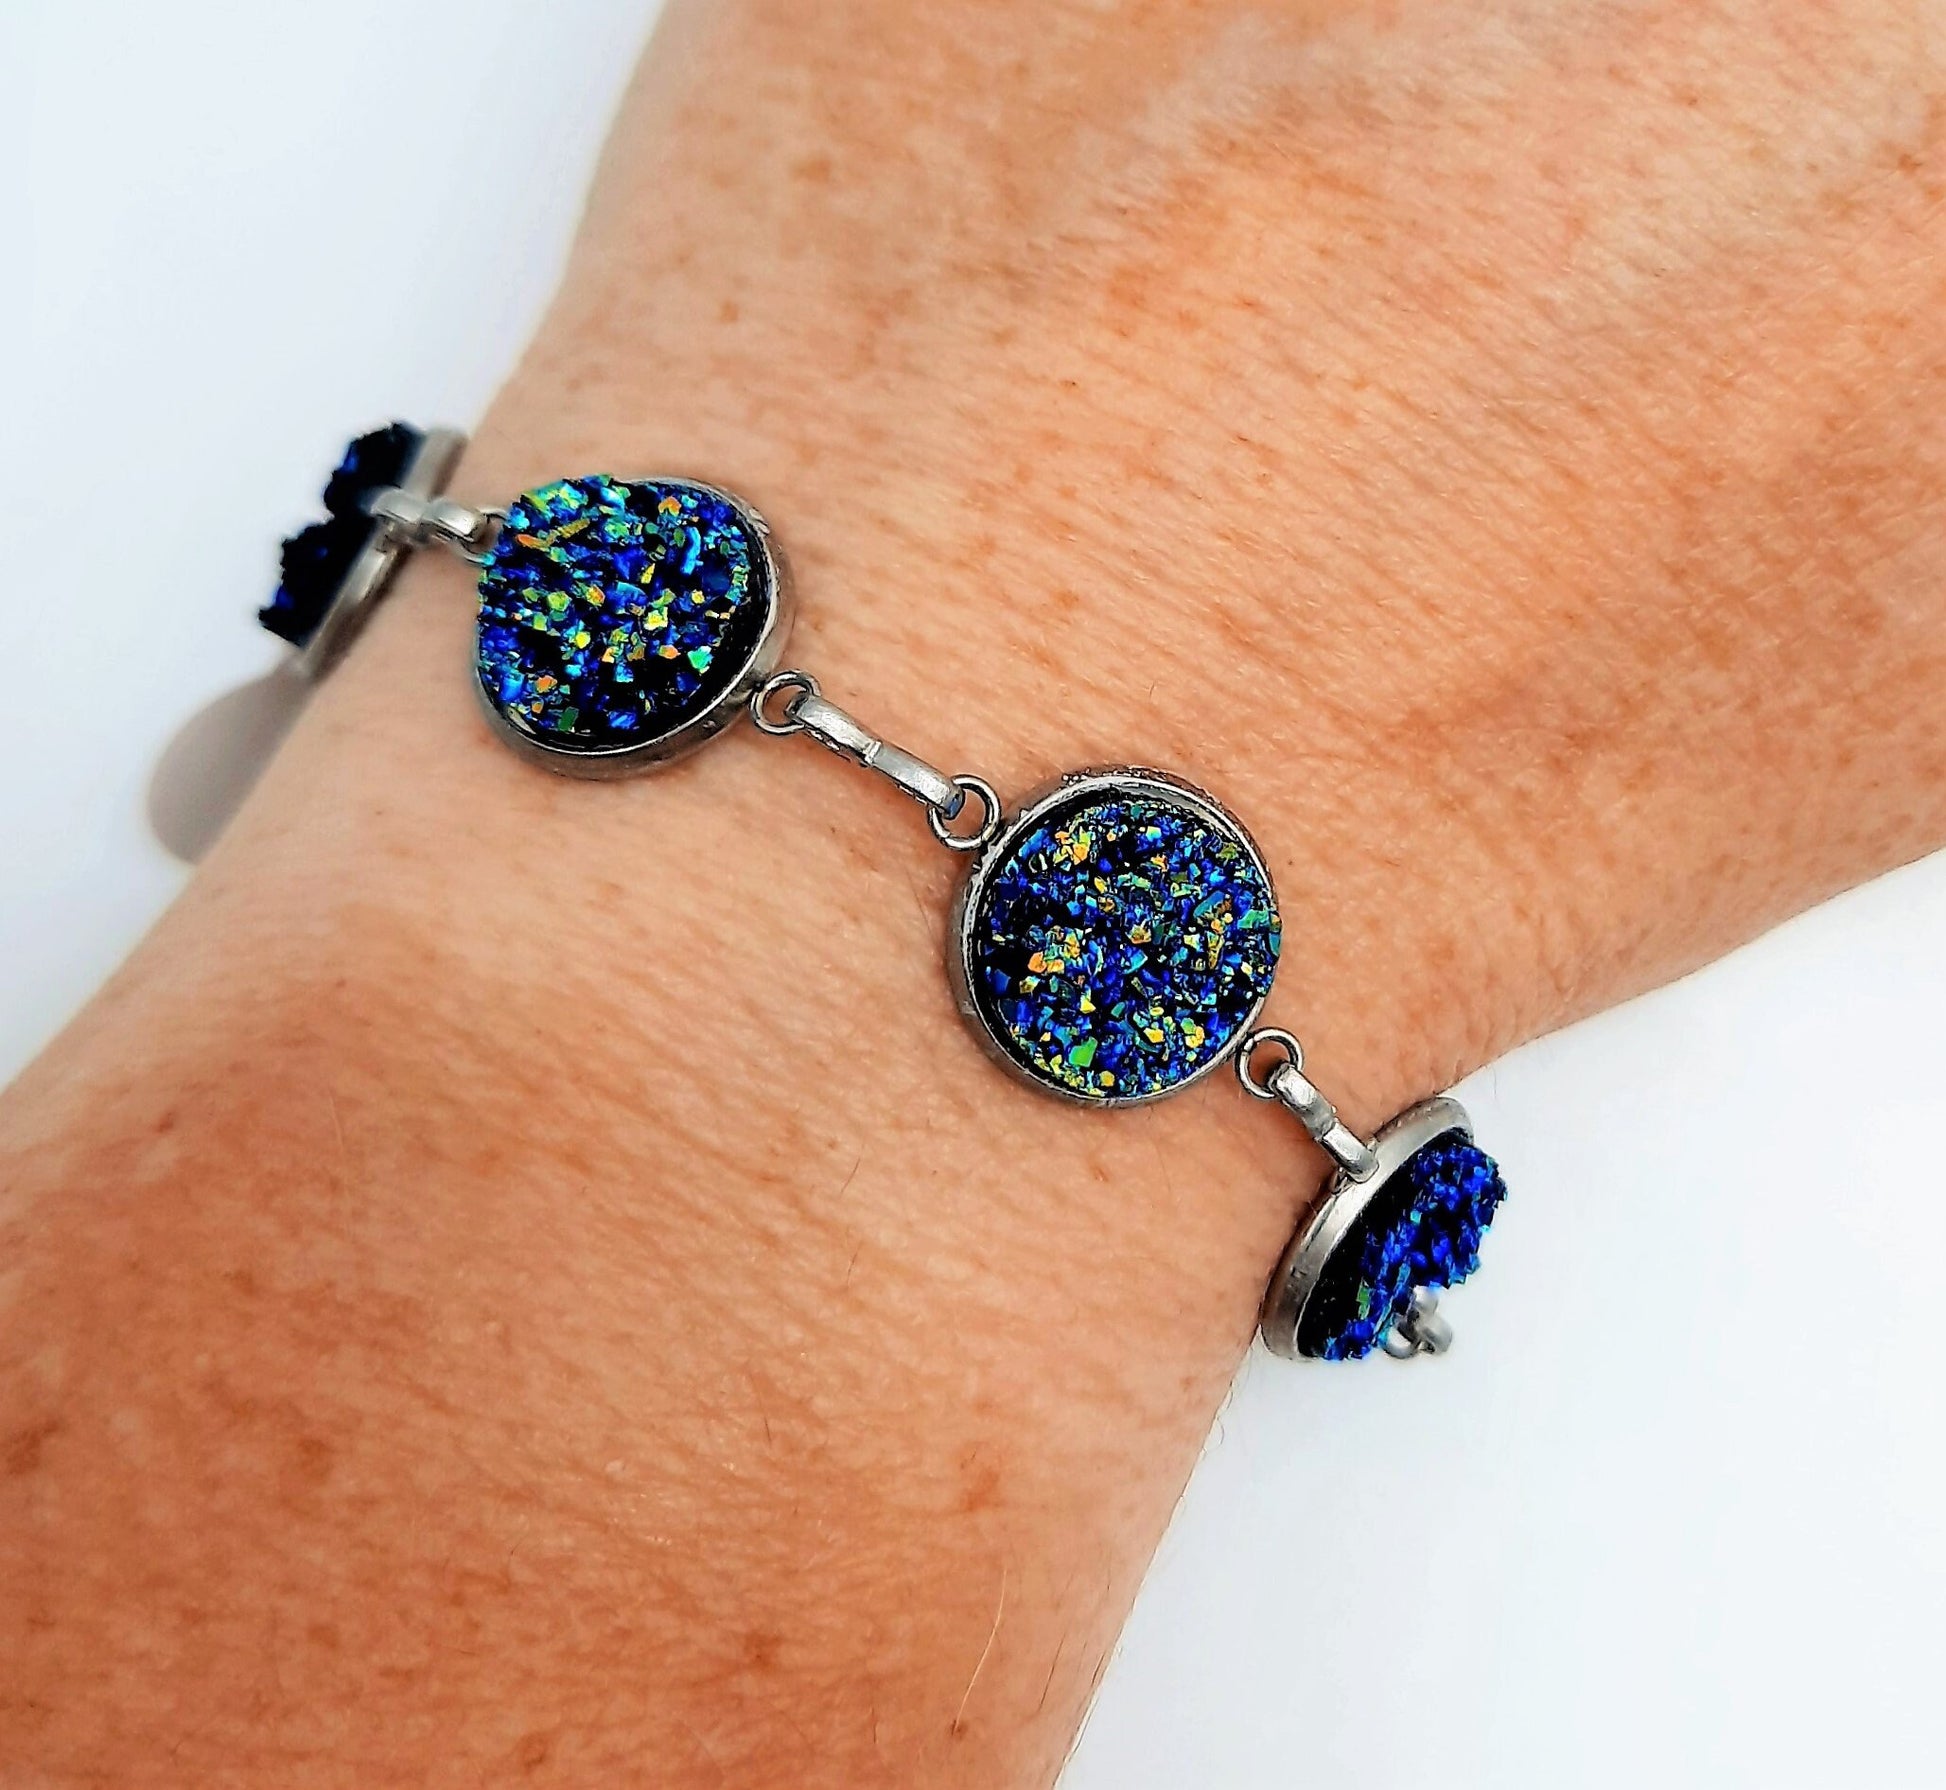 Handcrafted Iridescent Blue - Green Druzy Stone Link Bracelet - Hypoallergenic Silver Stainless Steel - Adjustable - Lobster Claw Closure